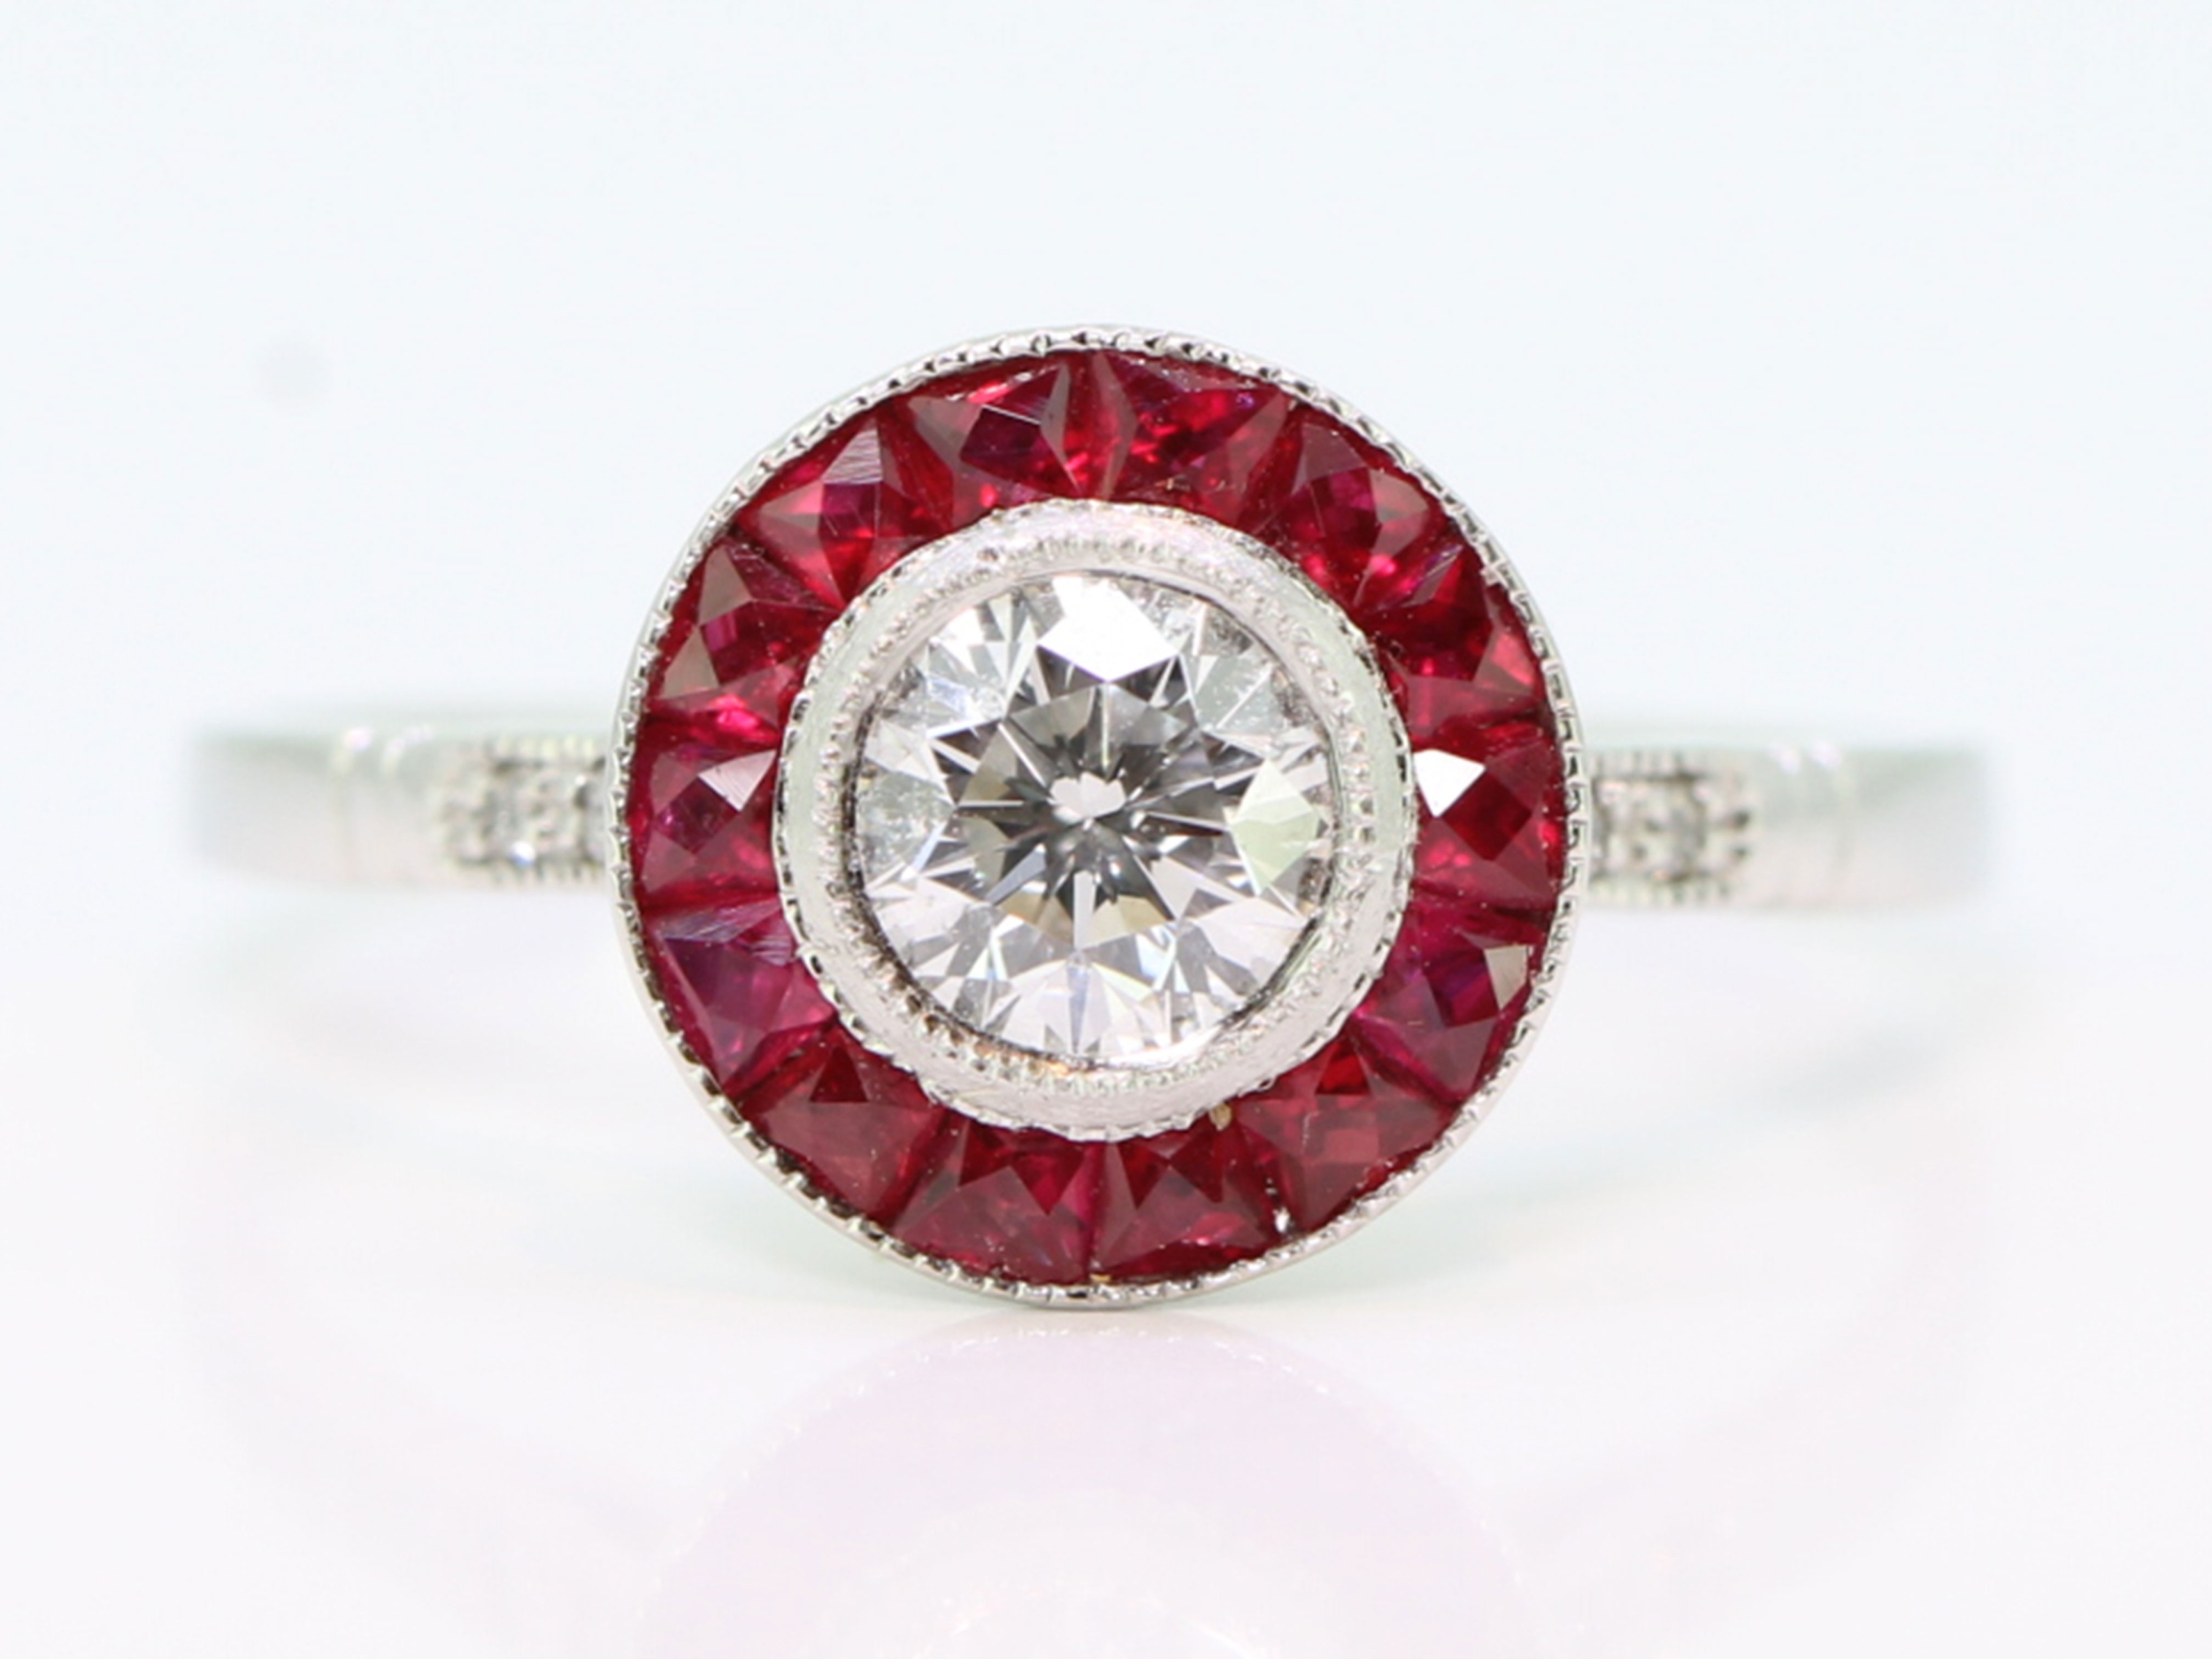 Art deco style .43 carat center vintage diamond and ruby ring